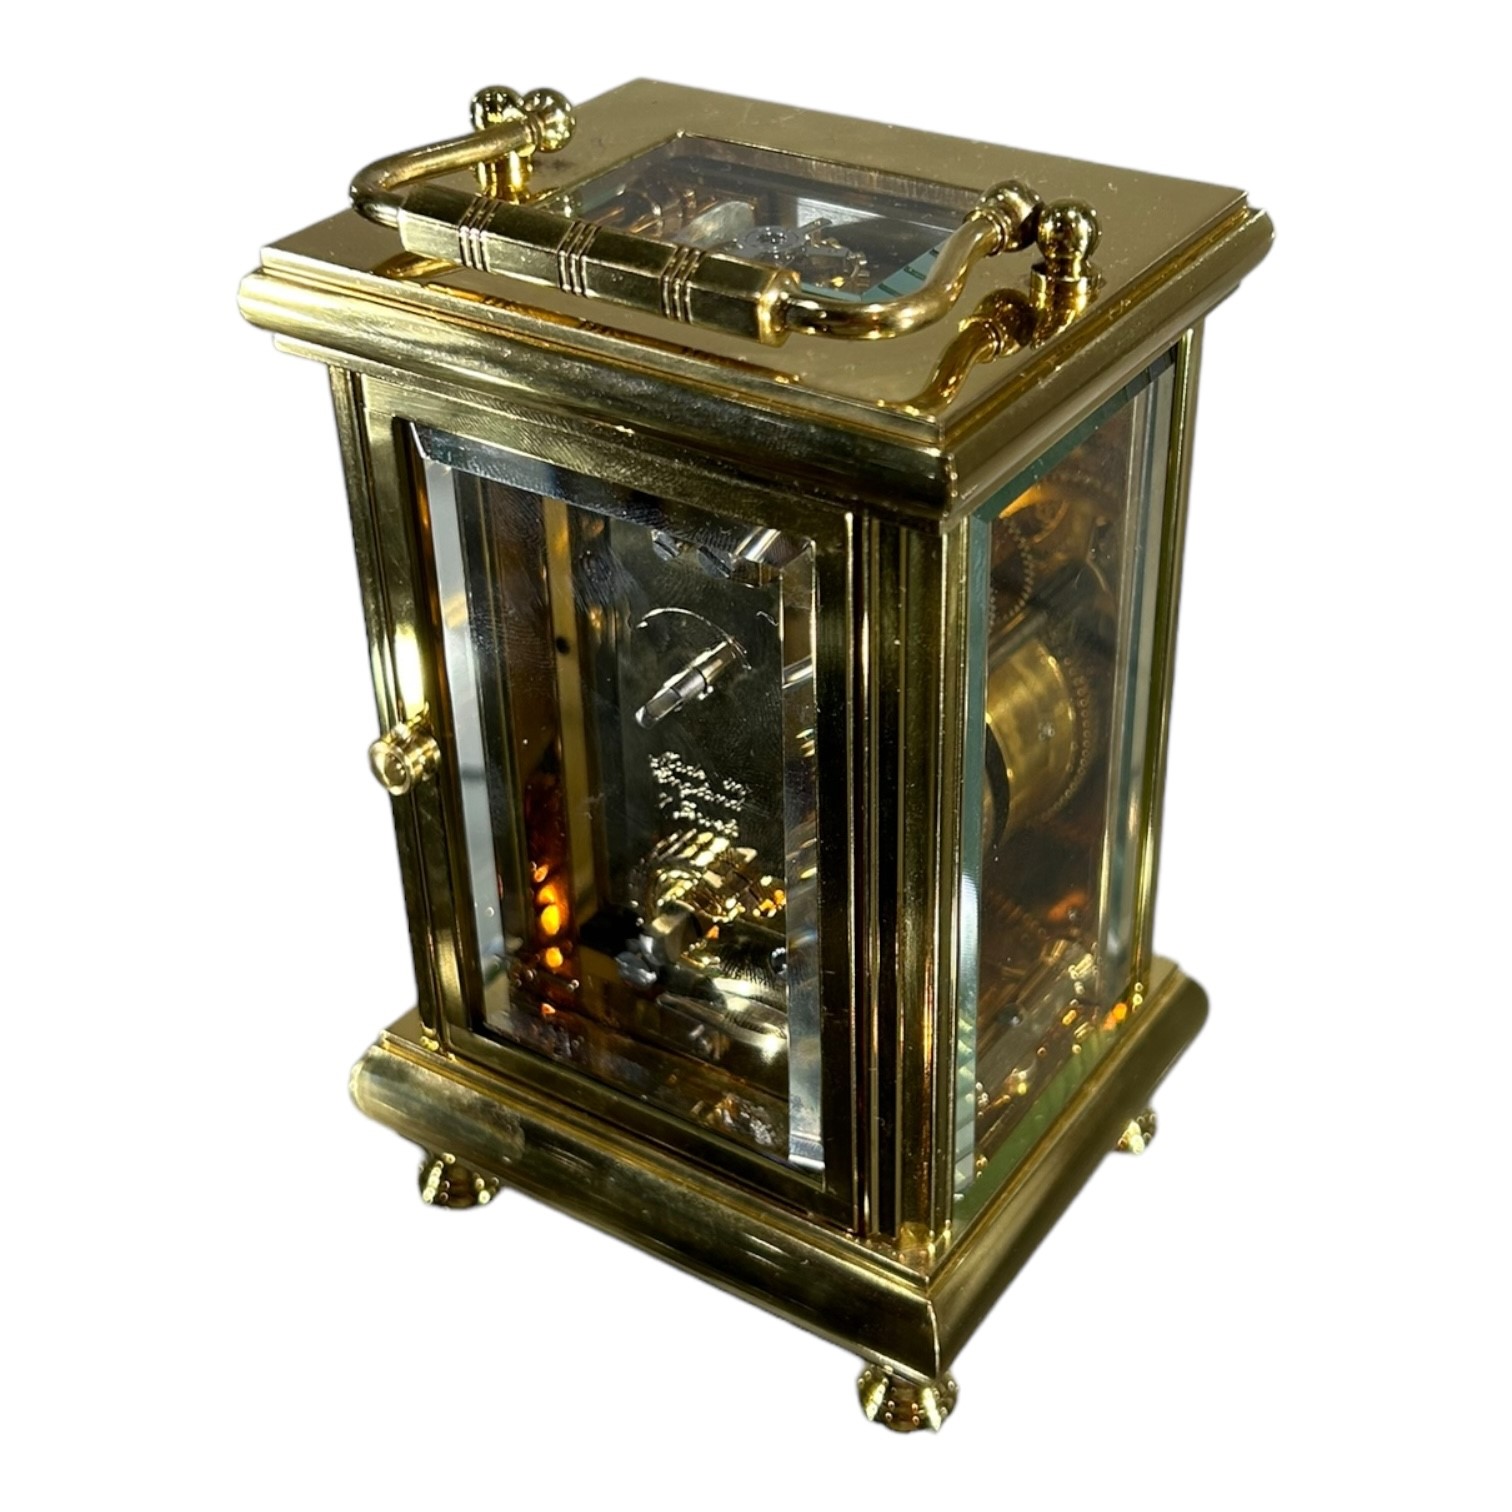 L'EPÉE FOR PALL MALL GOLDSMITHS, LONDON, AN EARLY 21ST CENTURY BRASS 8 DAY CARRIAGE CLOCK Having - Image 5 of 7